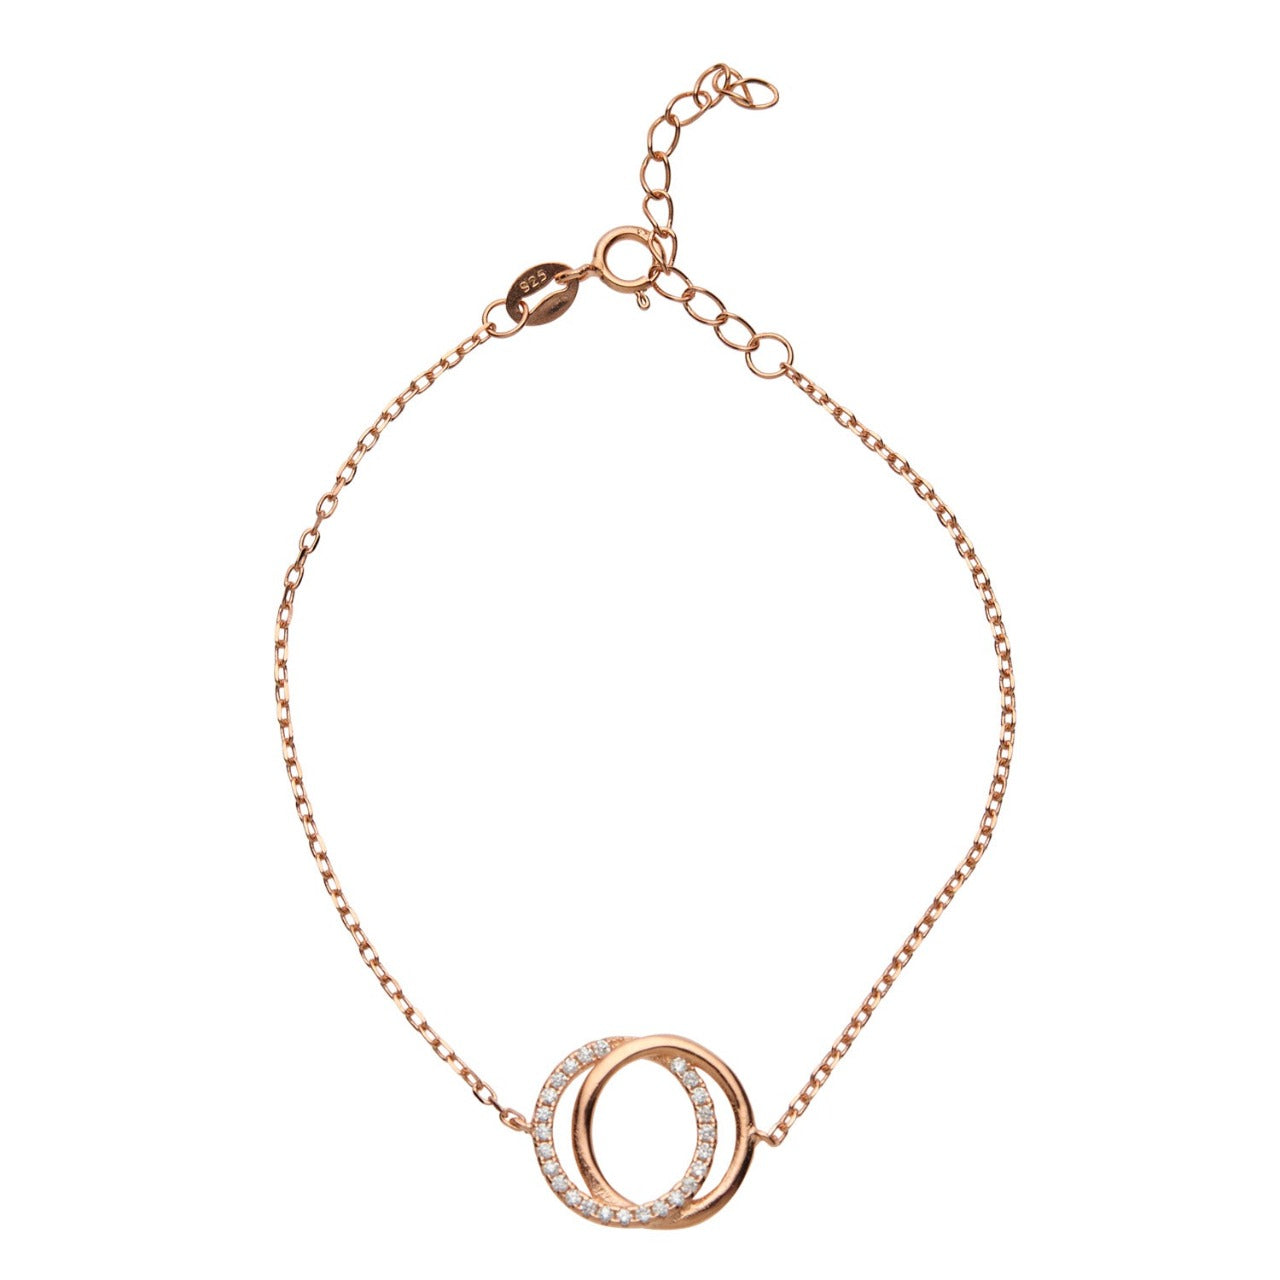 Rose Gold Interlocked Circle Bracelet by Kilkenny Silver   Sterling silver rose gold plated bracelet with clear colour cubic zirconia stones.